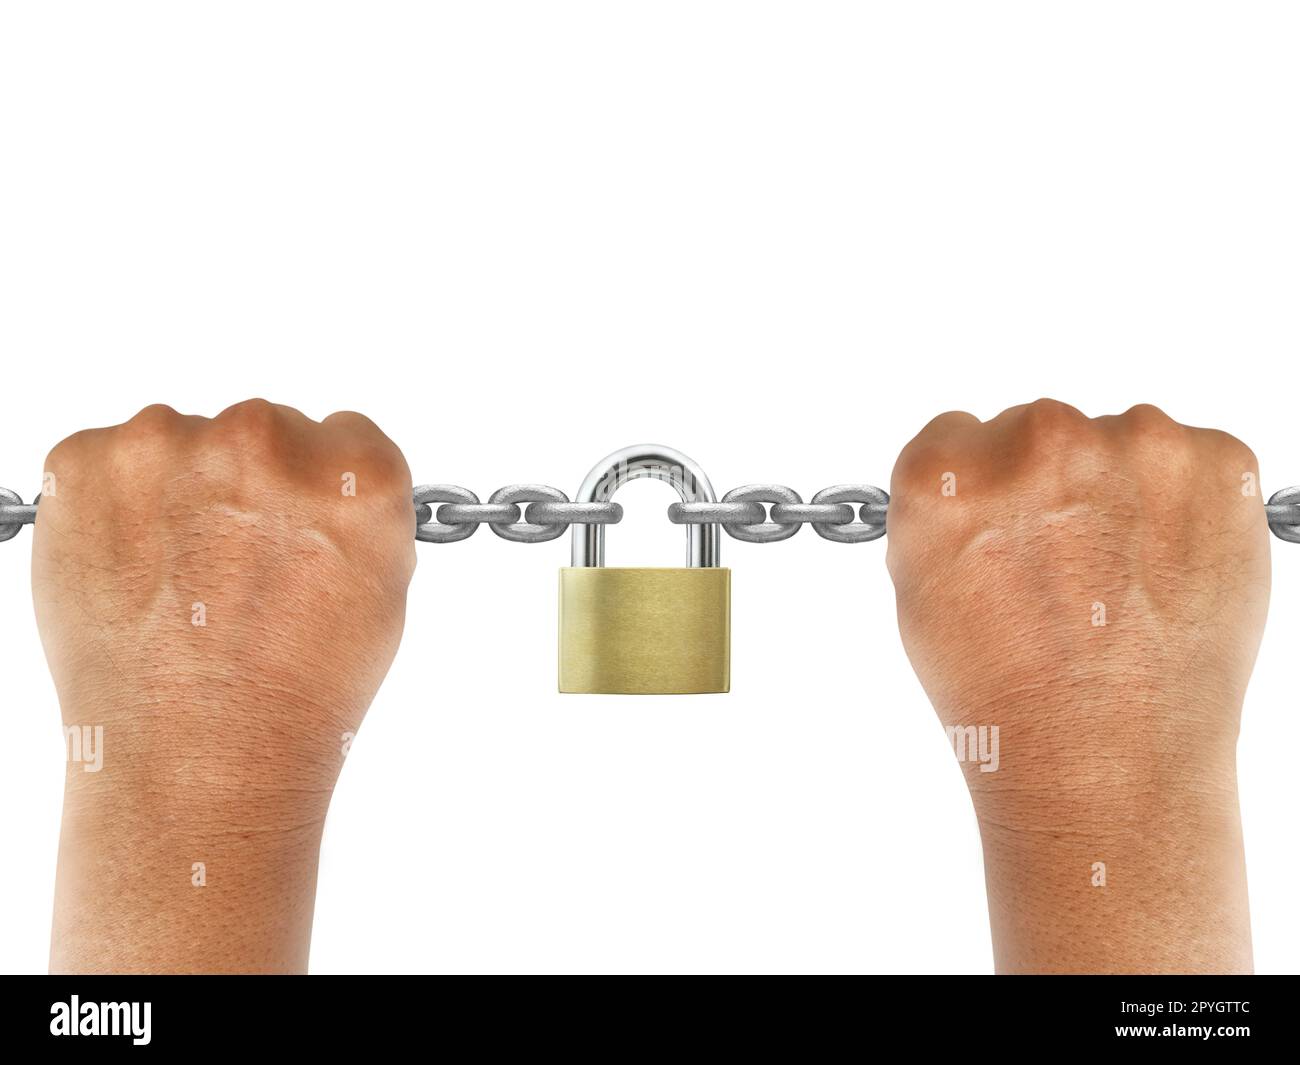 A man Handle gray metal chain and padlock on white background Stock Photo